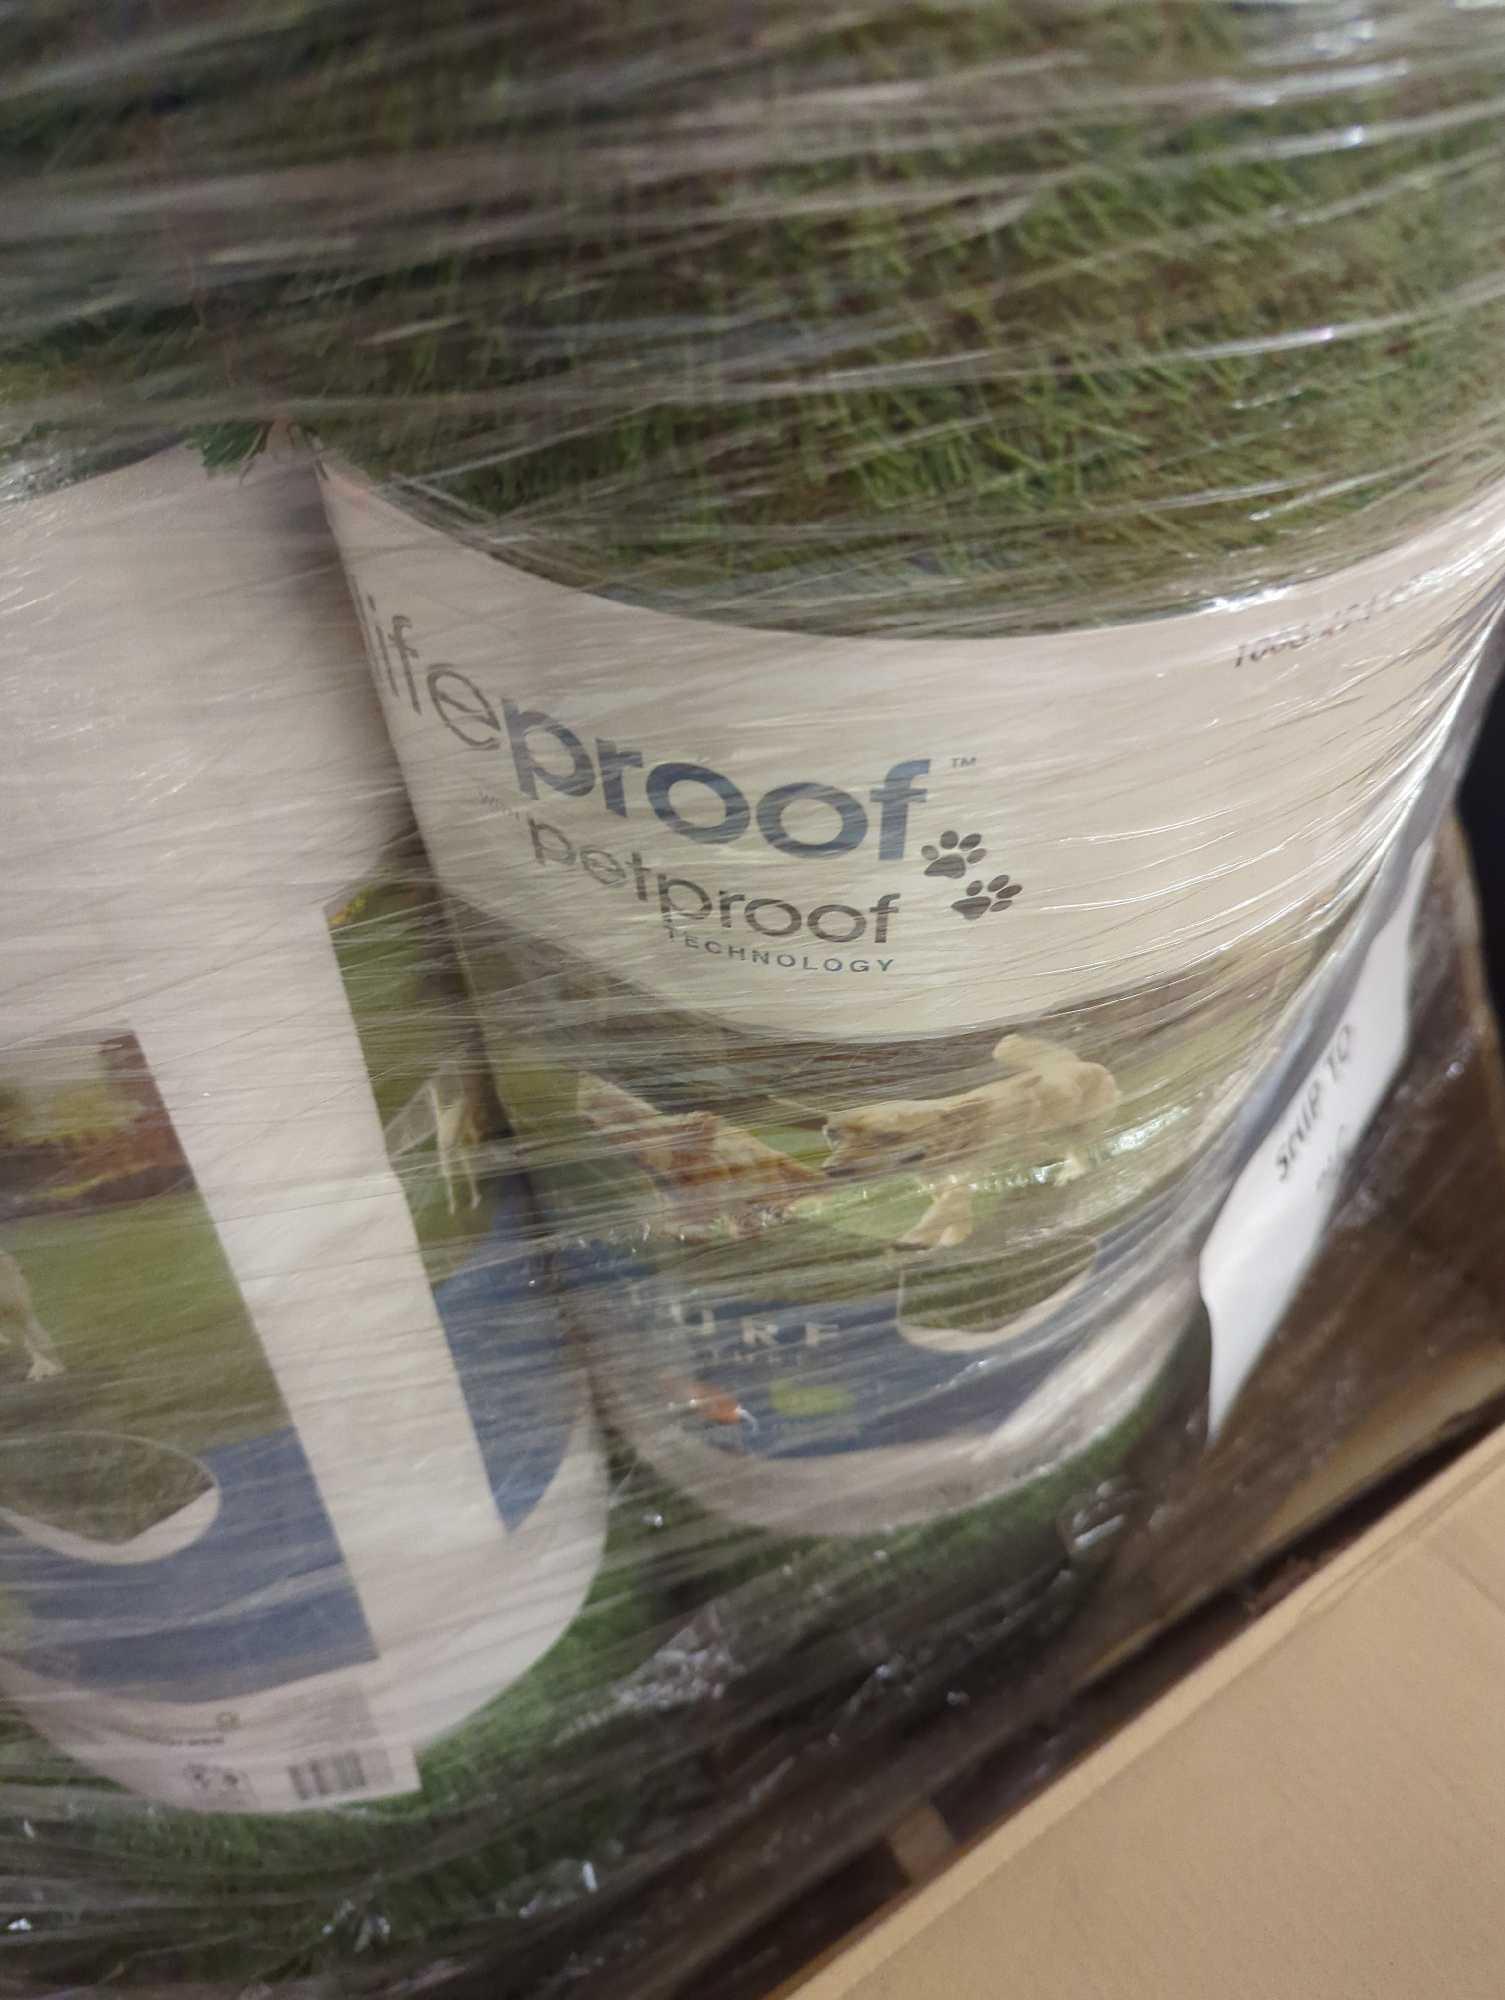 Lifeproof with Petproof Technology Premium Pet Turf 3.75 ft. x 9 ft. Green Artificial Grass Rug,